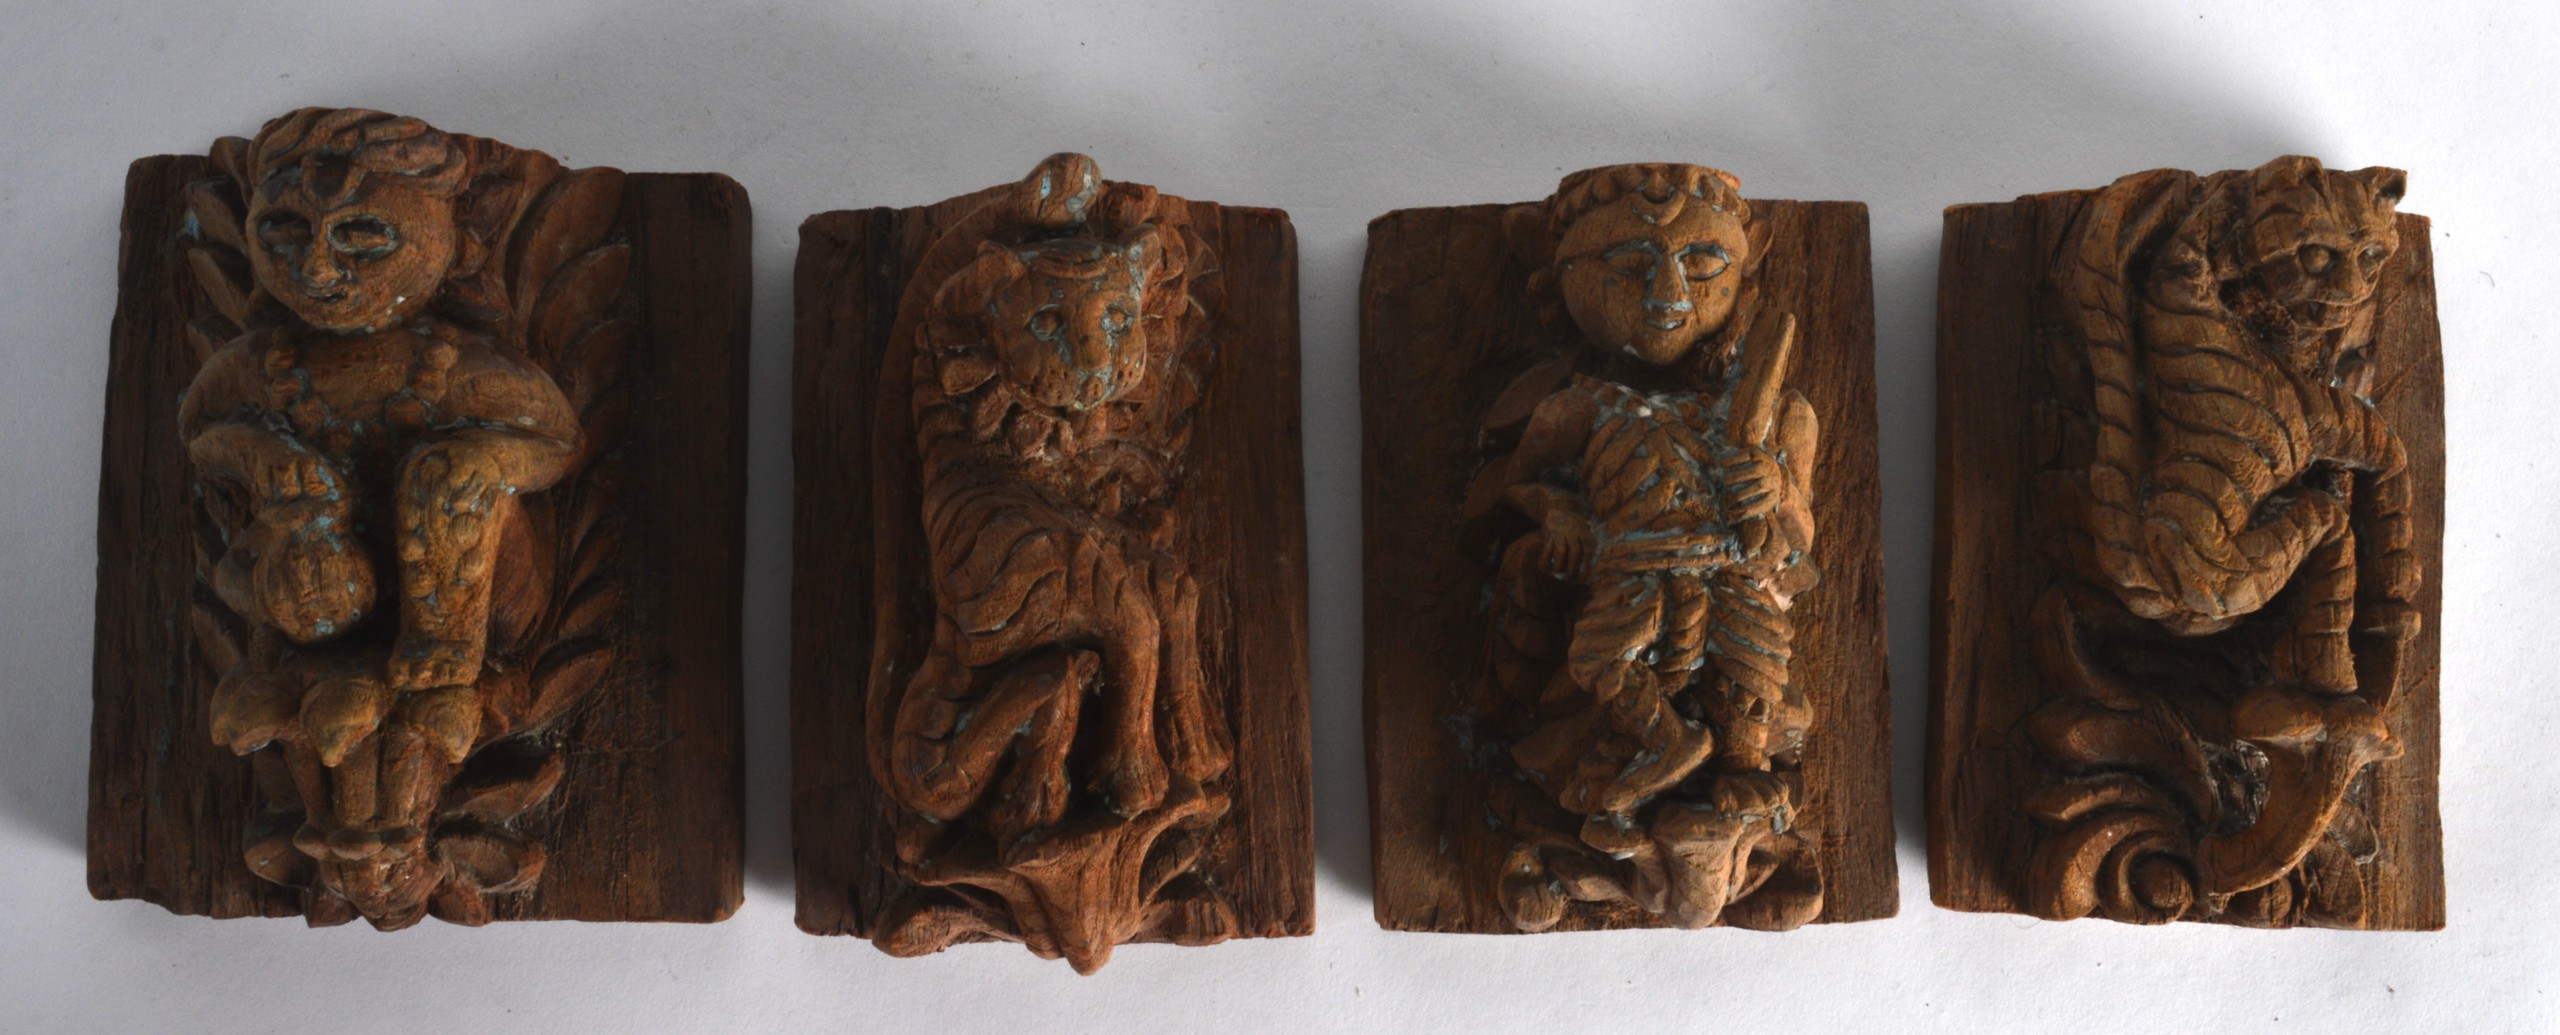 A GROUP OF FOUR 17TH/18TH CENTURY INDIAN CARVED WOODEN TEMPLE PANELS each carved with a figure